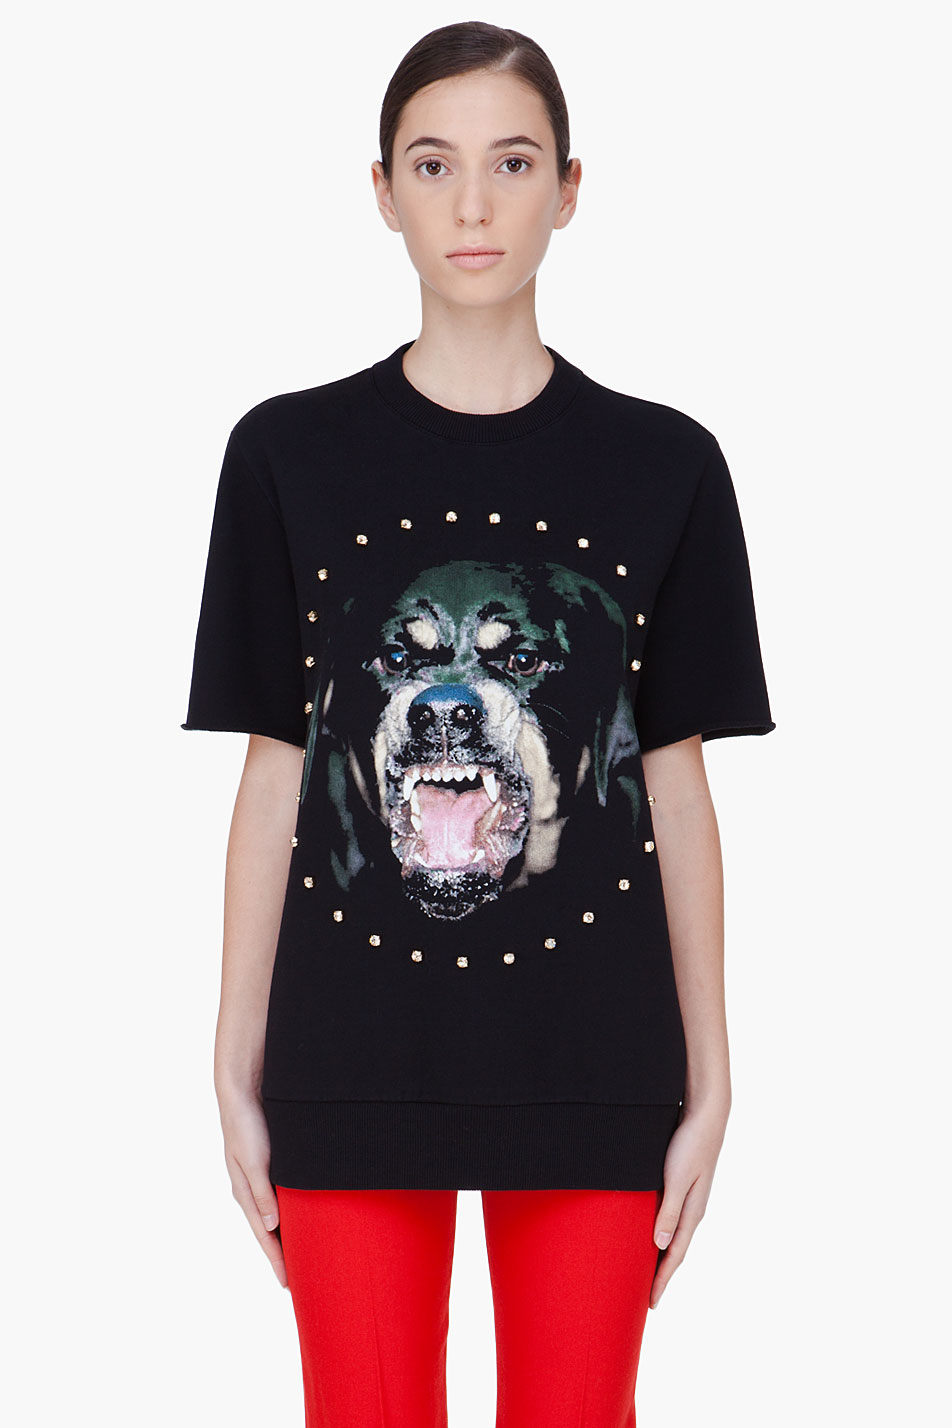 Givenchy Cotton Sweatshirt with Rottweiler Print in Black - Lyst